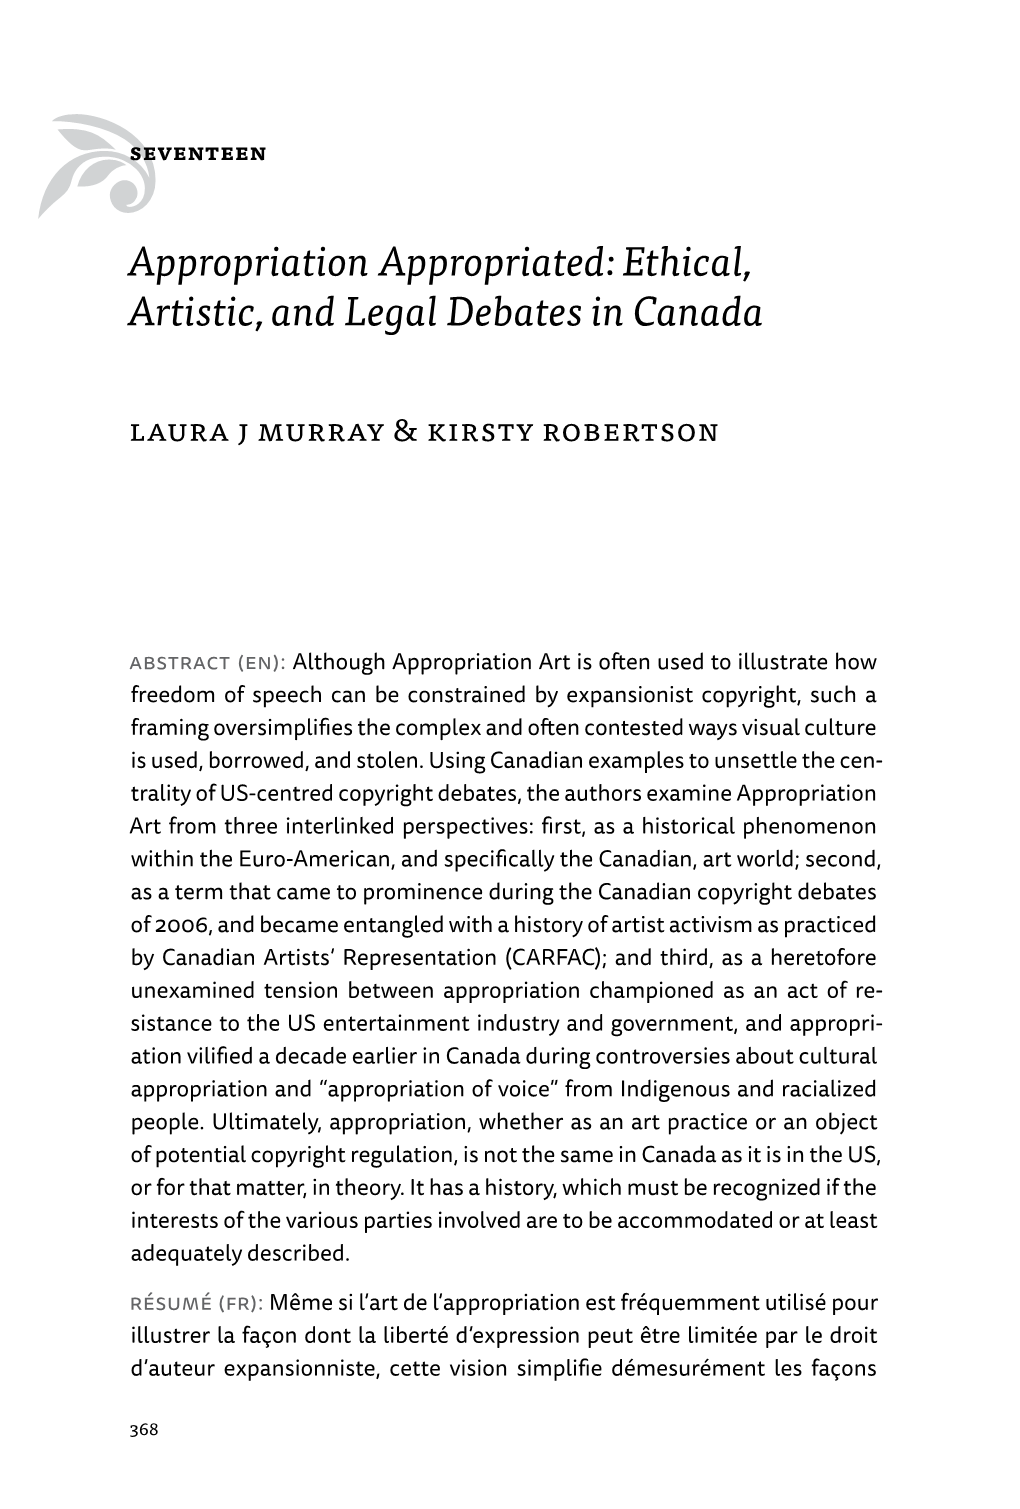 Appropriation Appropriated: Ethical, Artistic, and Legal Debates in Canada